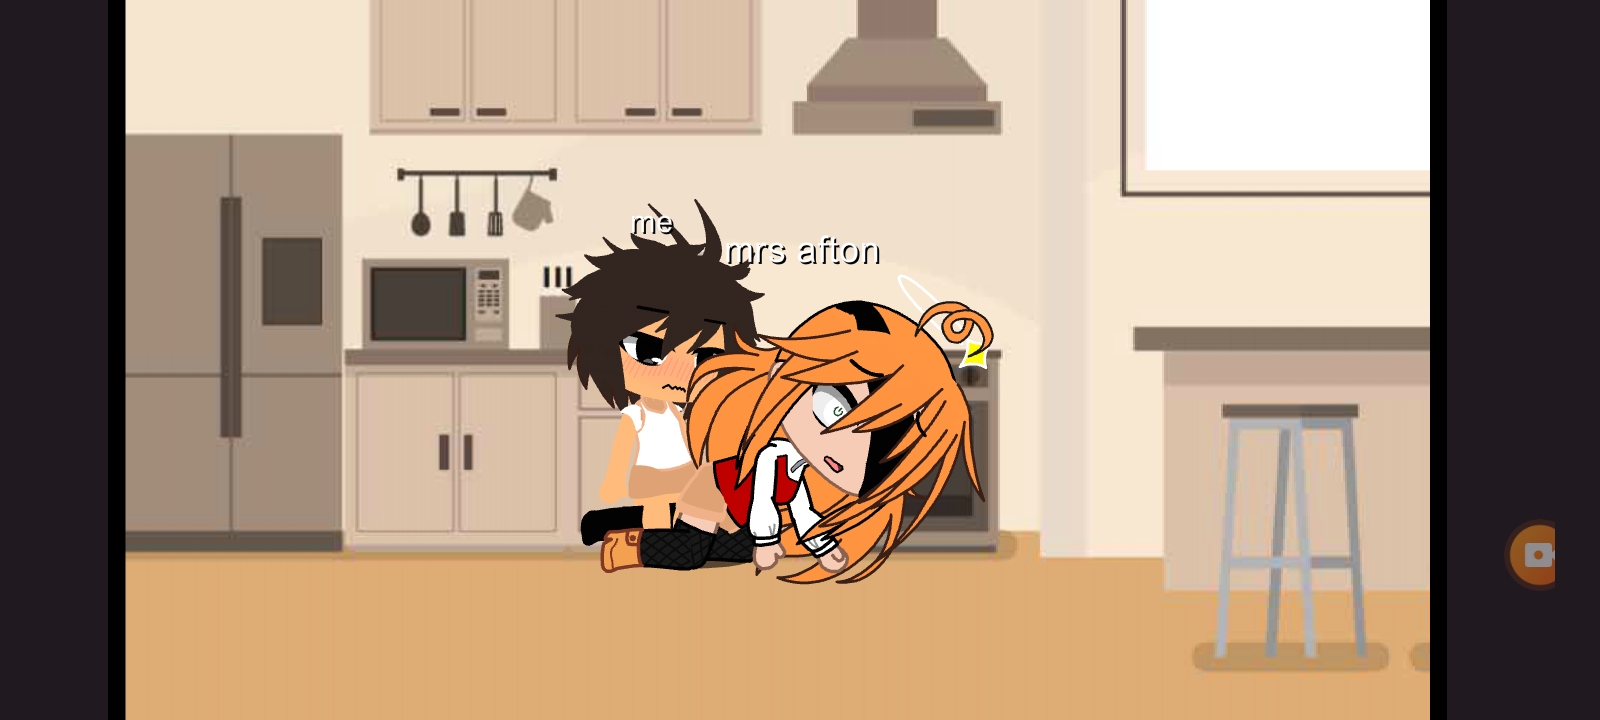 Me and mrs afton fuck